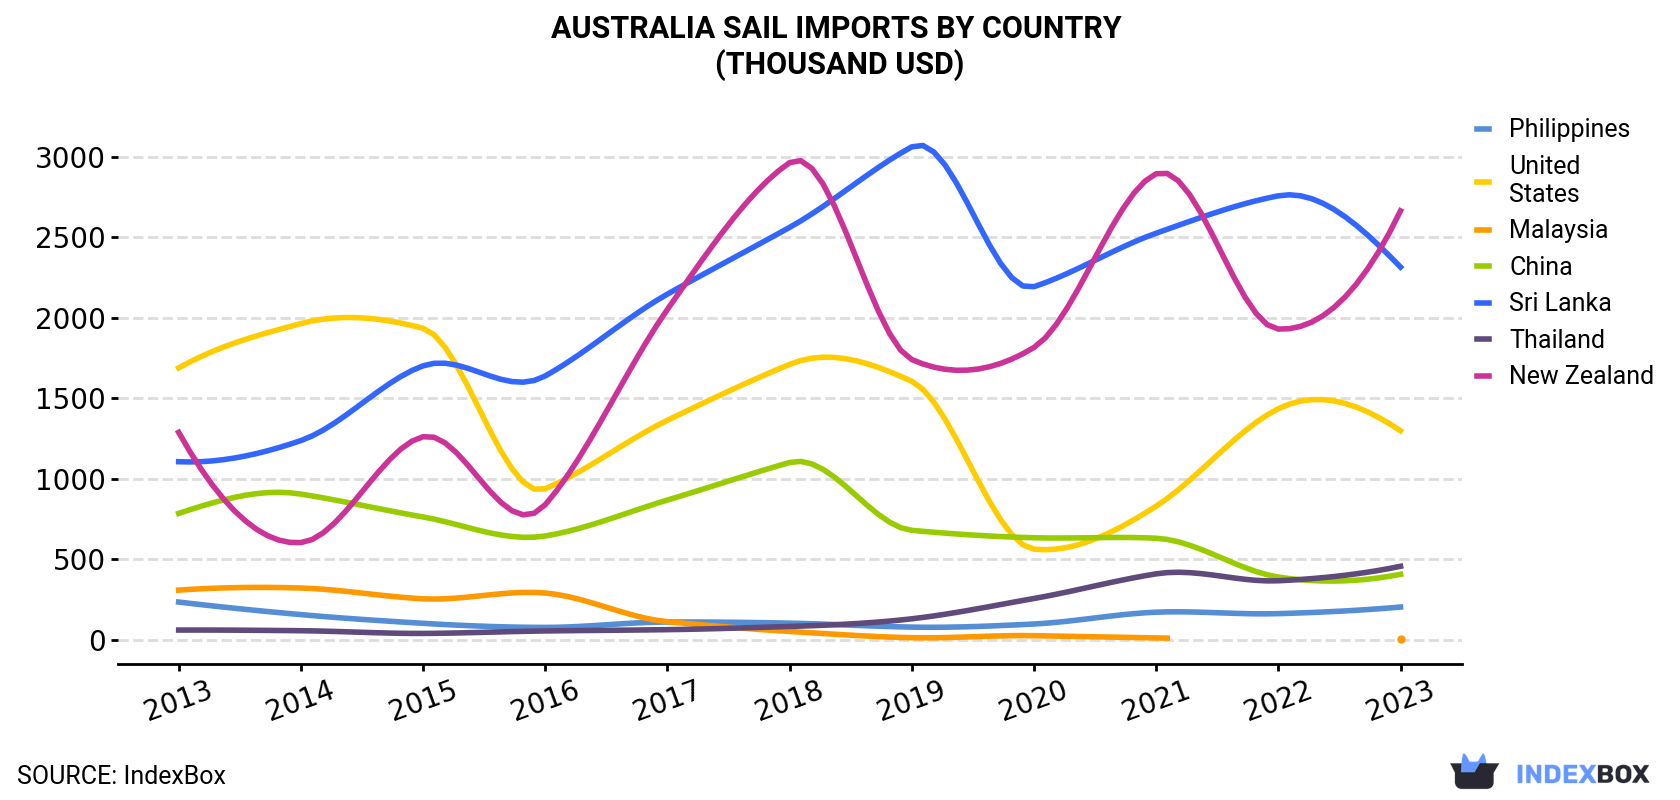 Australia Sail Imports By Country (Thousand USD)